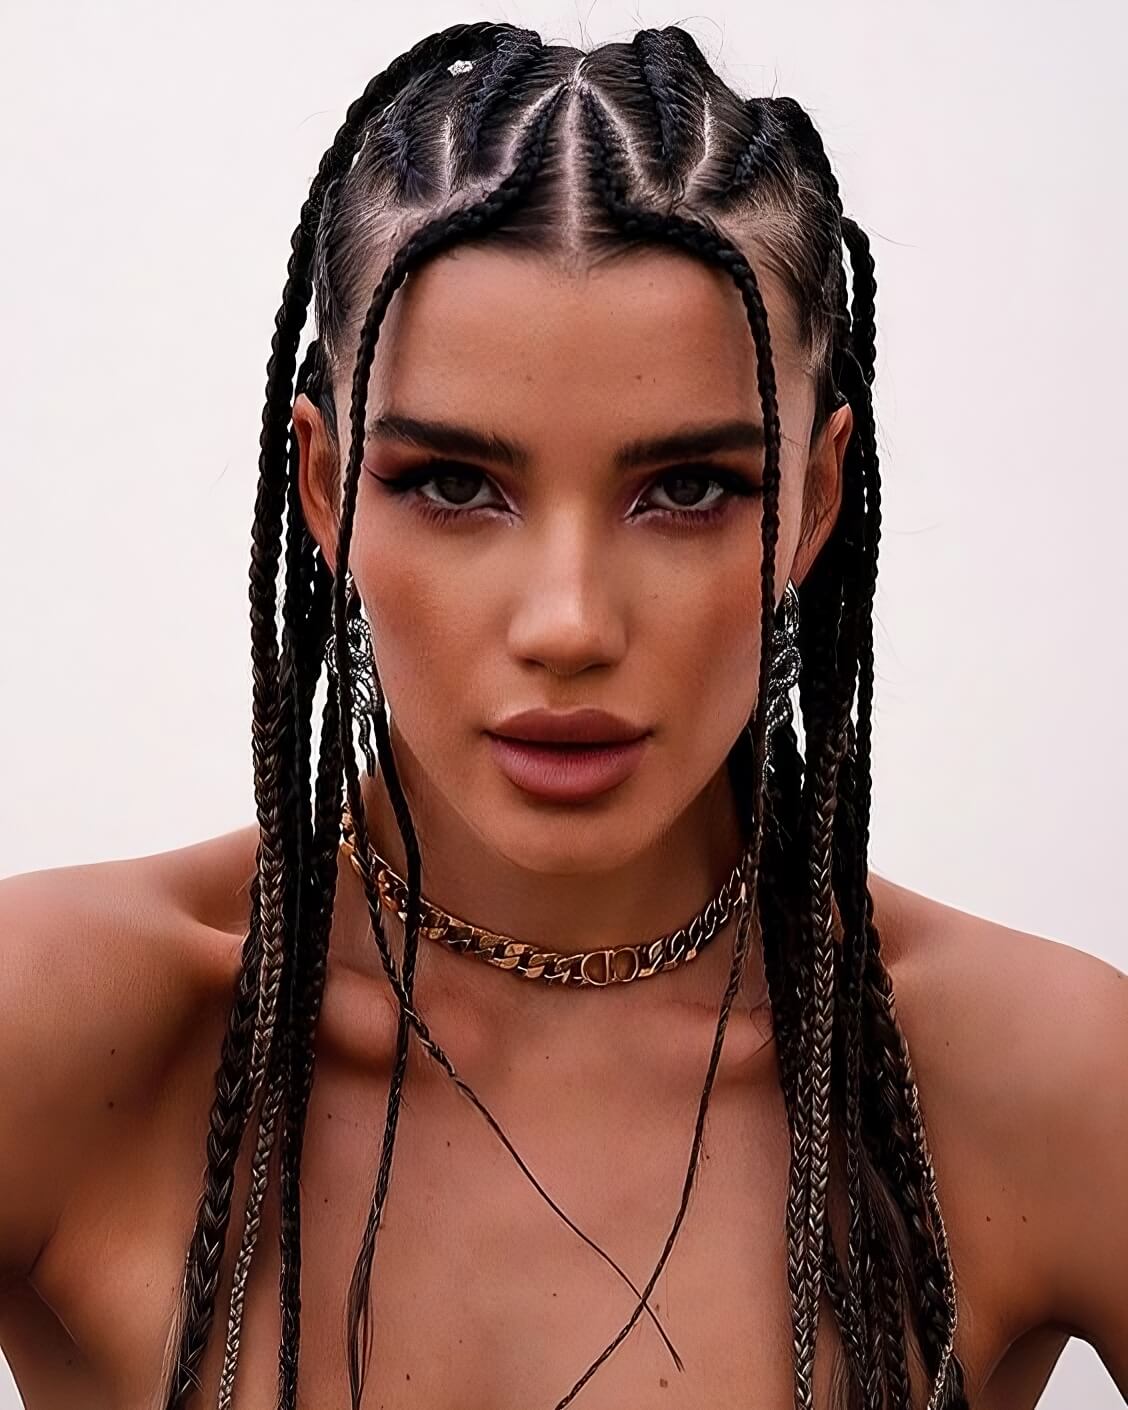 50 Trendy Braided Hairstyles To Instantly Glam Up Your Look - 395